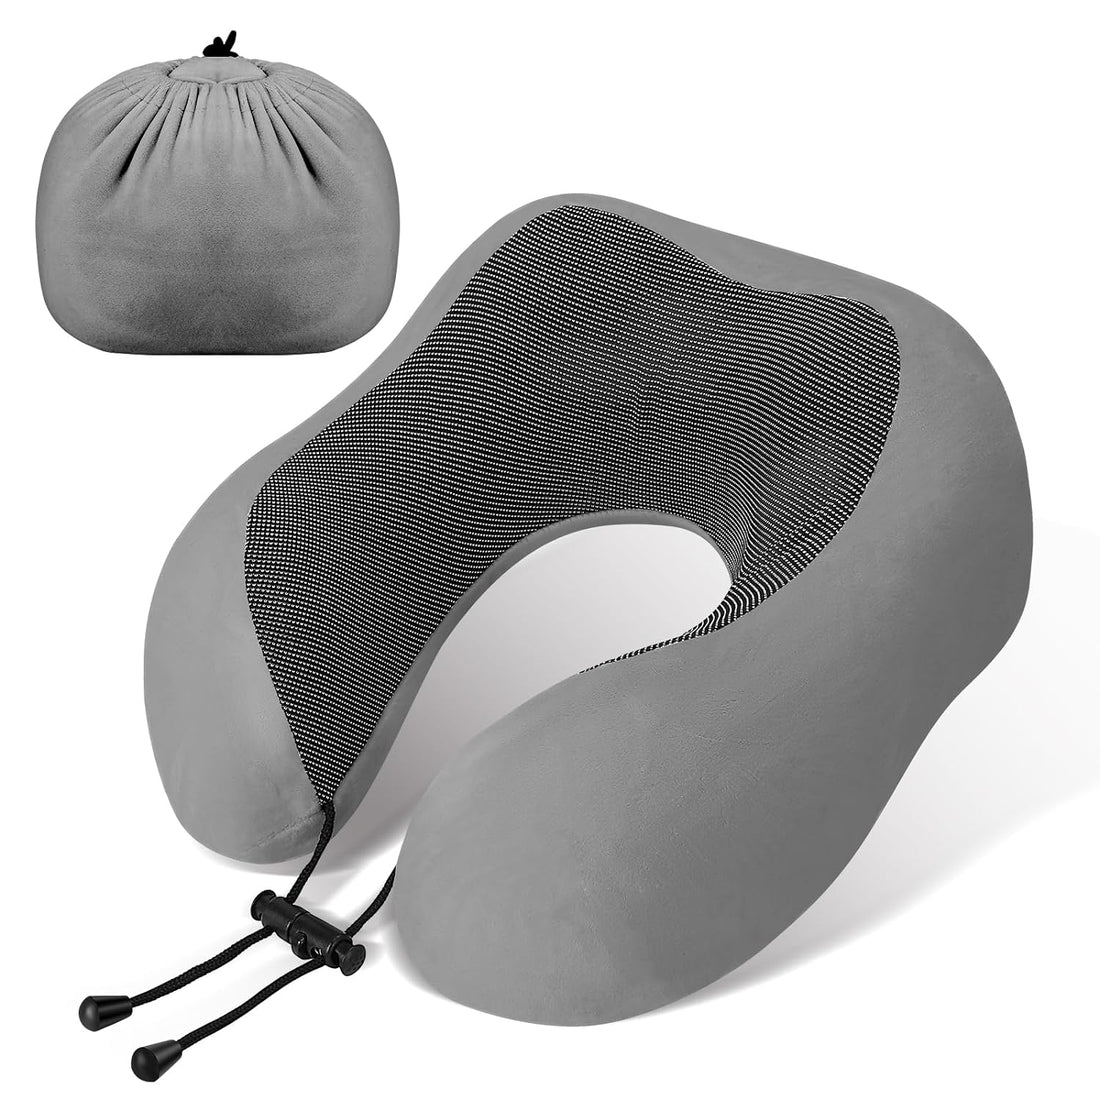 wowpower Airplane Travel Neck Pillow, 100% Pure Memory Foam (4 Seconds Rebound) on Head Support,Upgrade Portable Neck Pillow for Plane and Car Traveling Sleep 1 Pack(Grey)